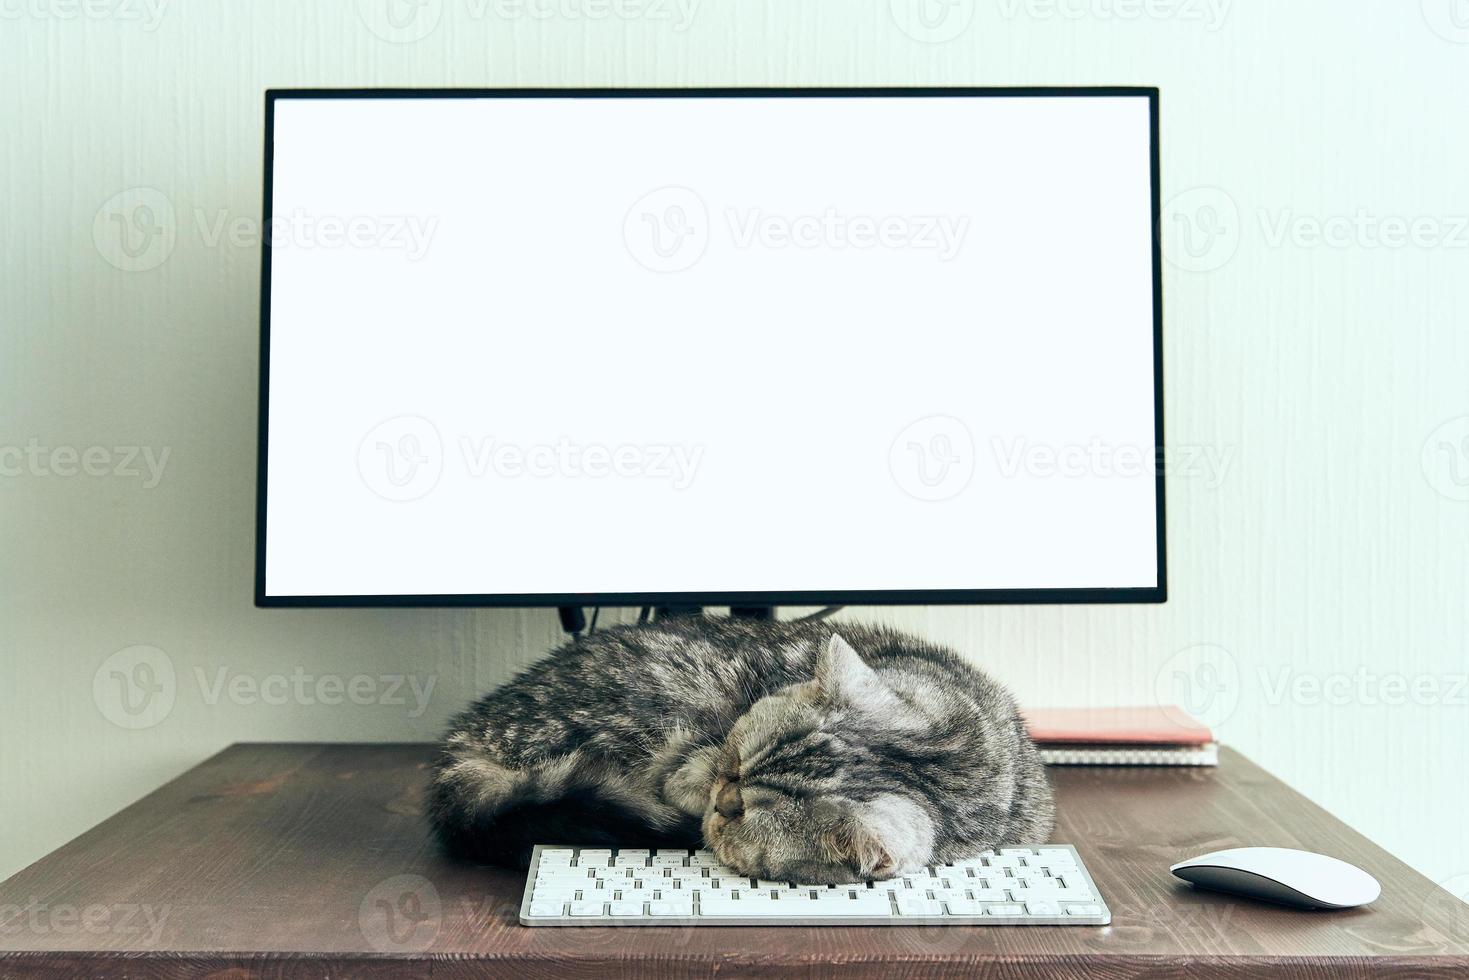 Keep calm and stay home concept. Fluffy cat sleeps on desktop next to computer. photo